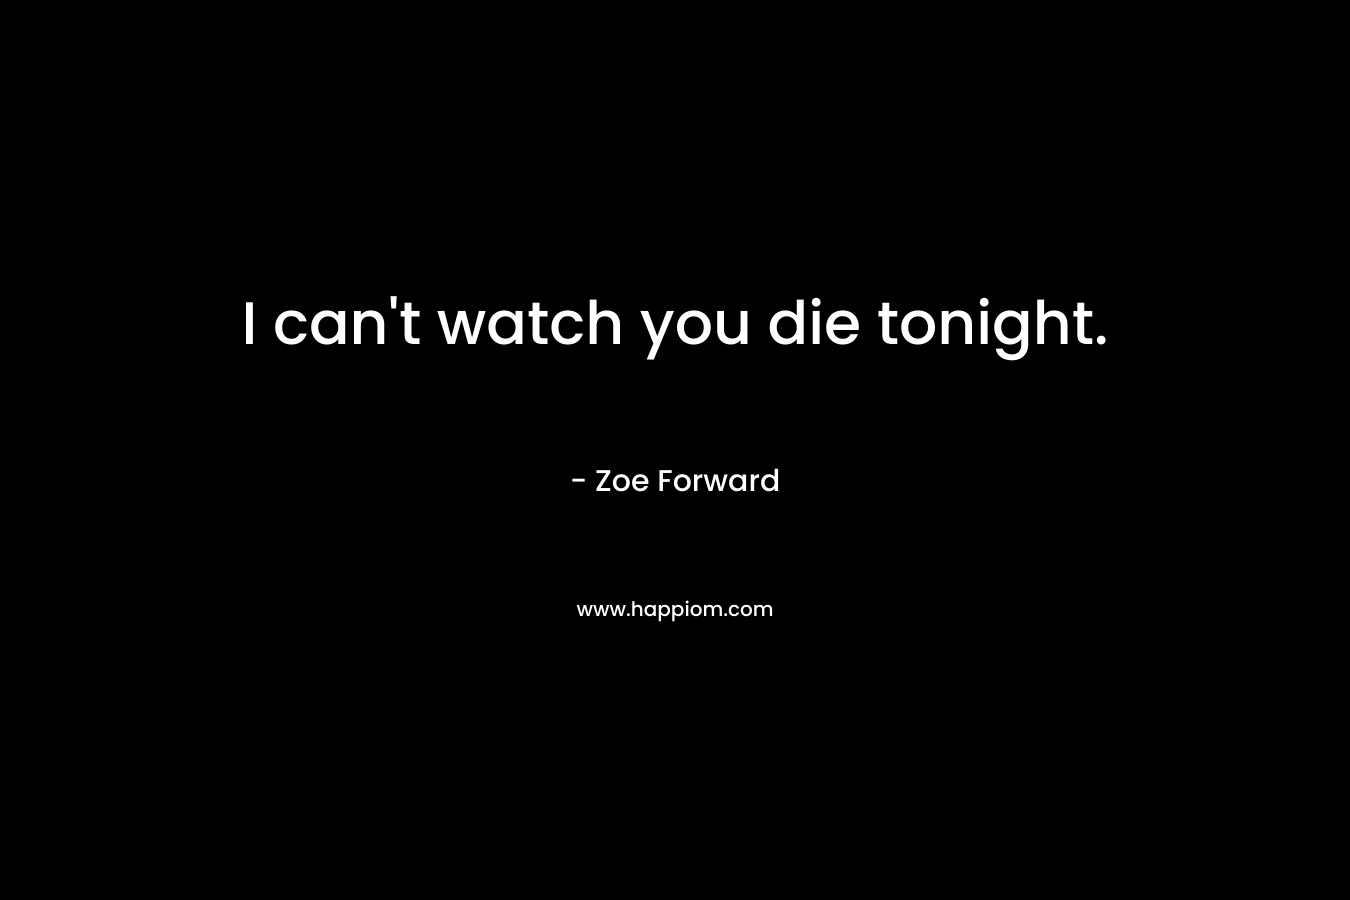 I can't watch you die tonight.